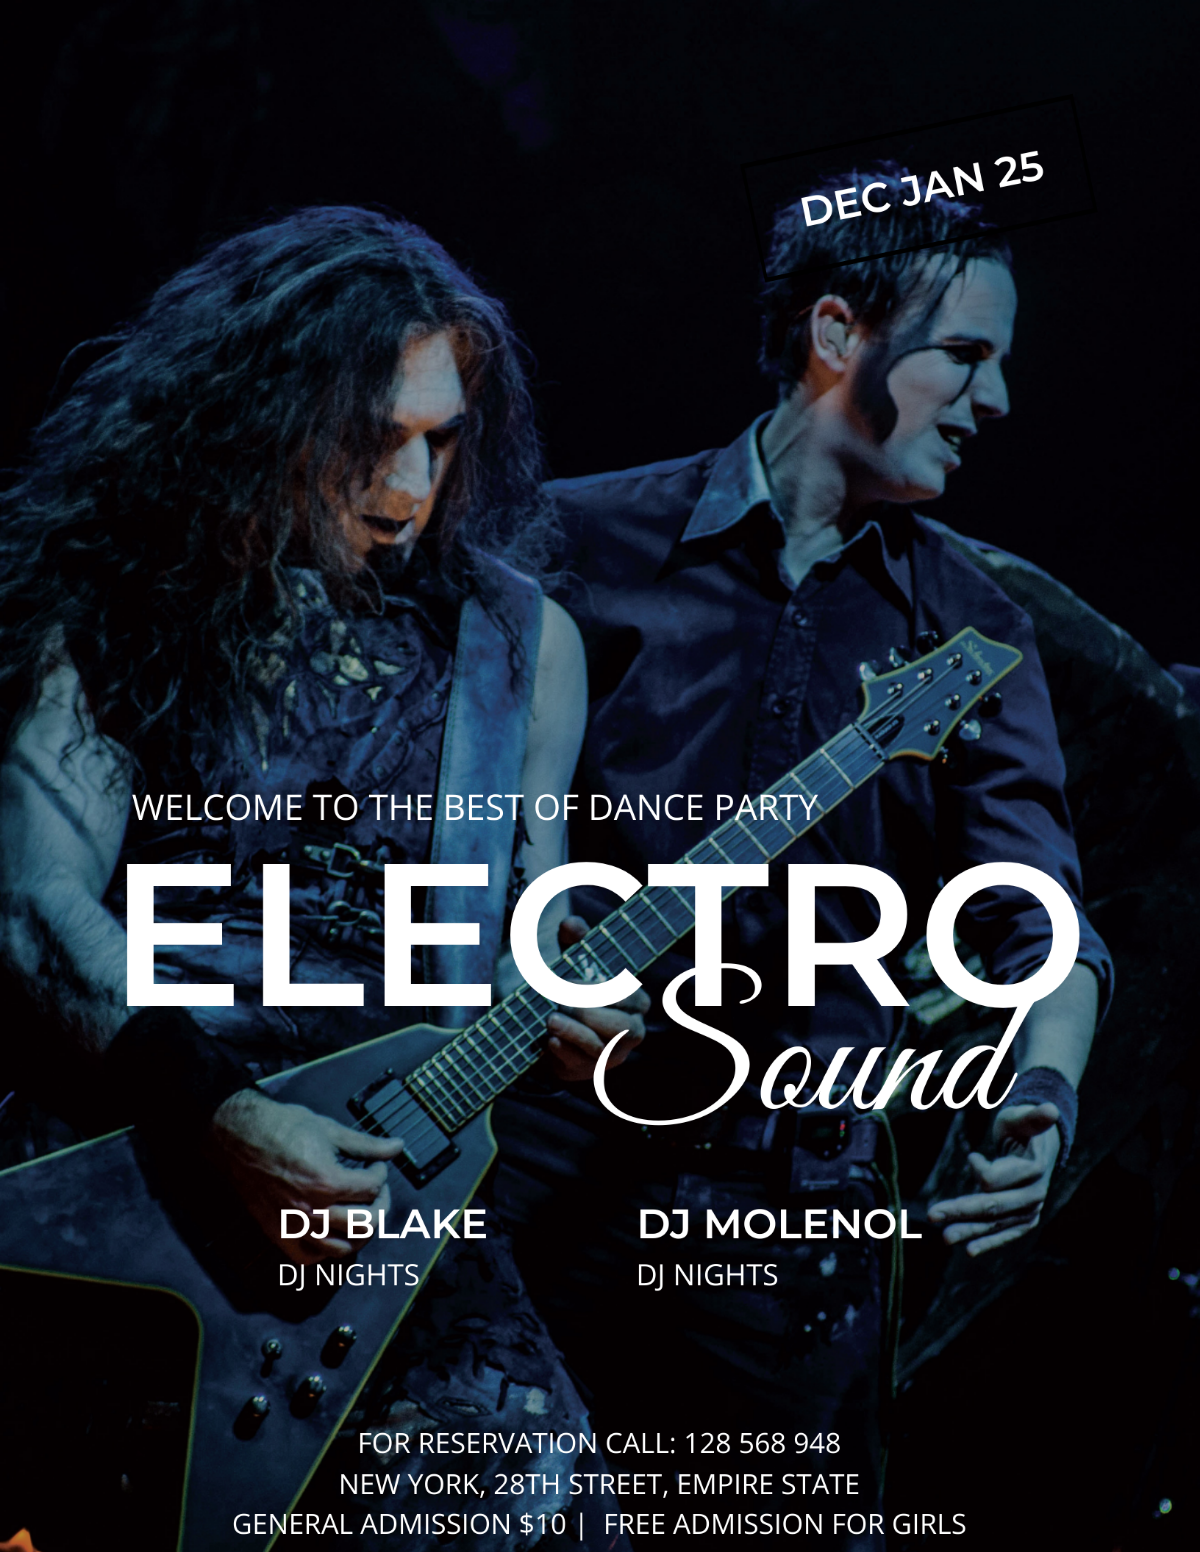 Electro Concert Party Flyer Template